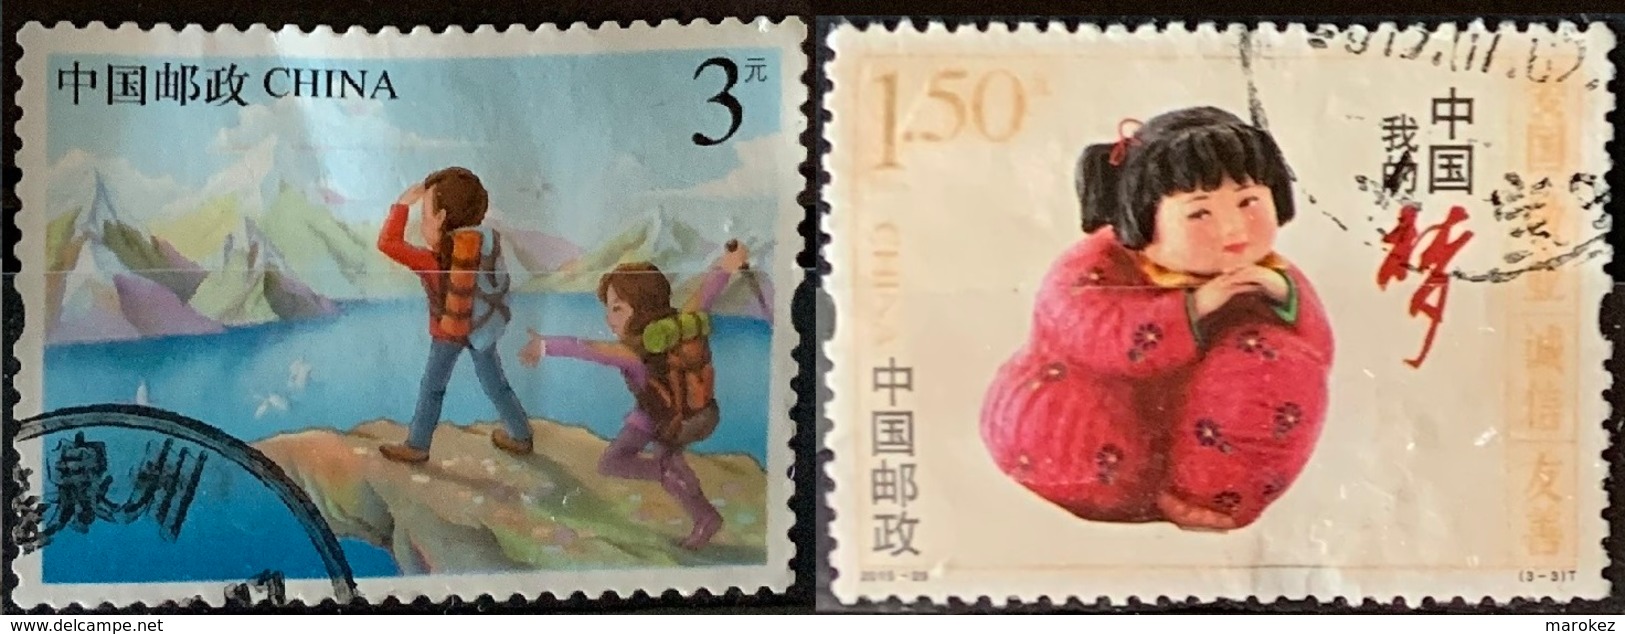 CHINA PRC 2015 Tourism & Nationalist Values 2 Postally Used Stamps MICHEL # 4677,4783 - Used Stamps